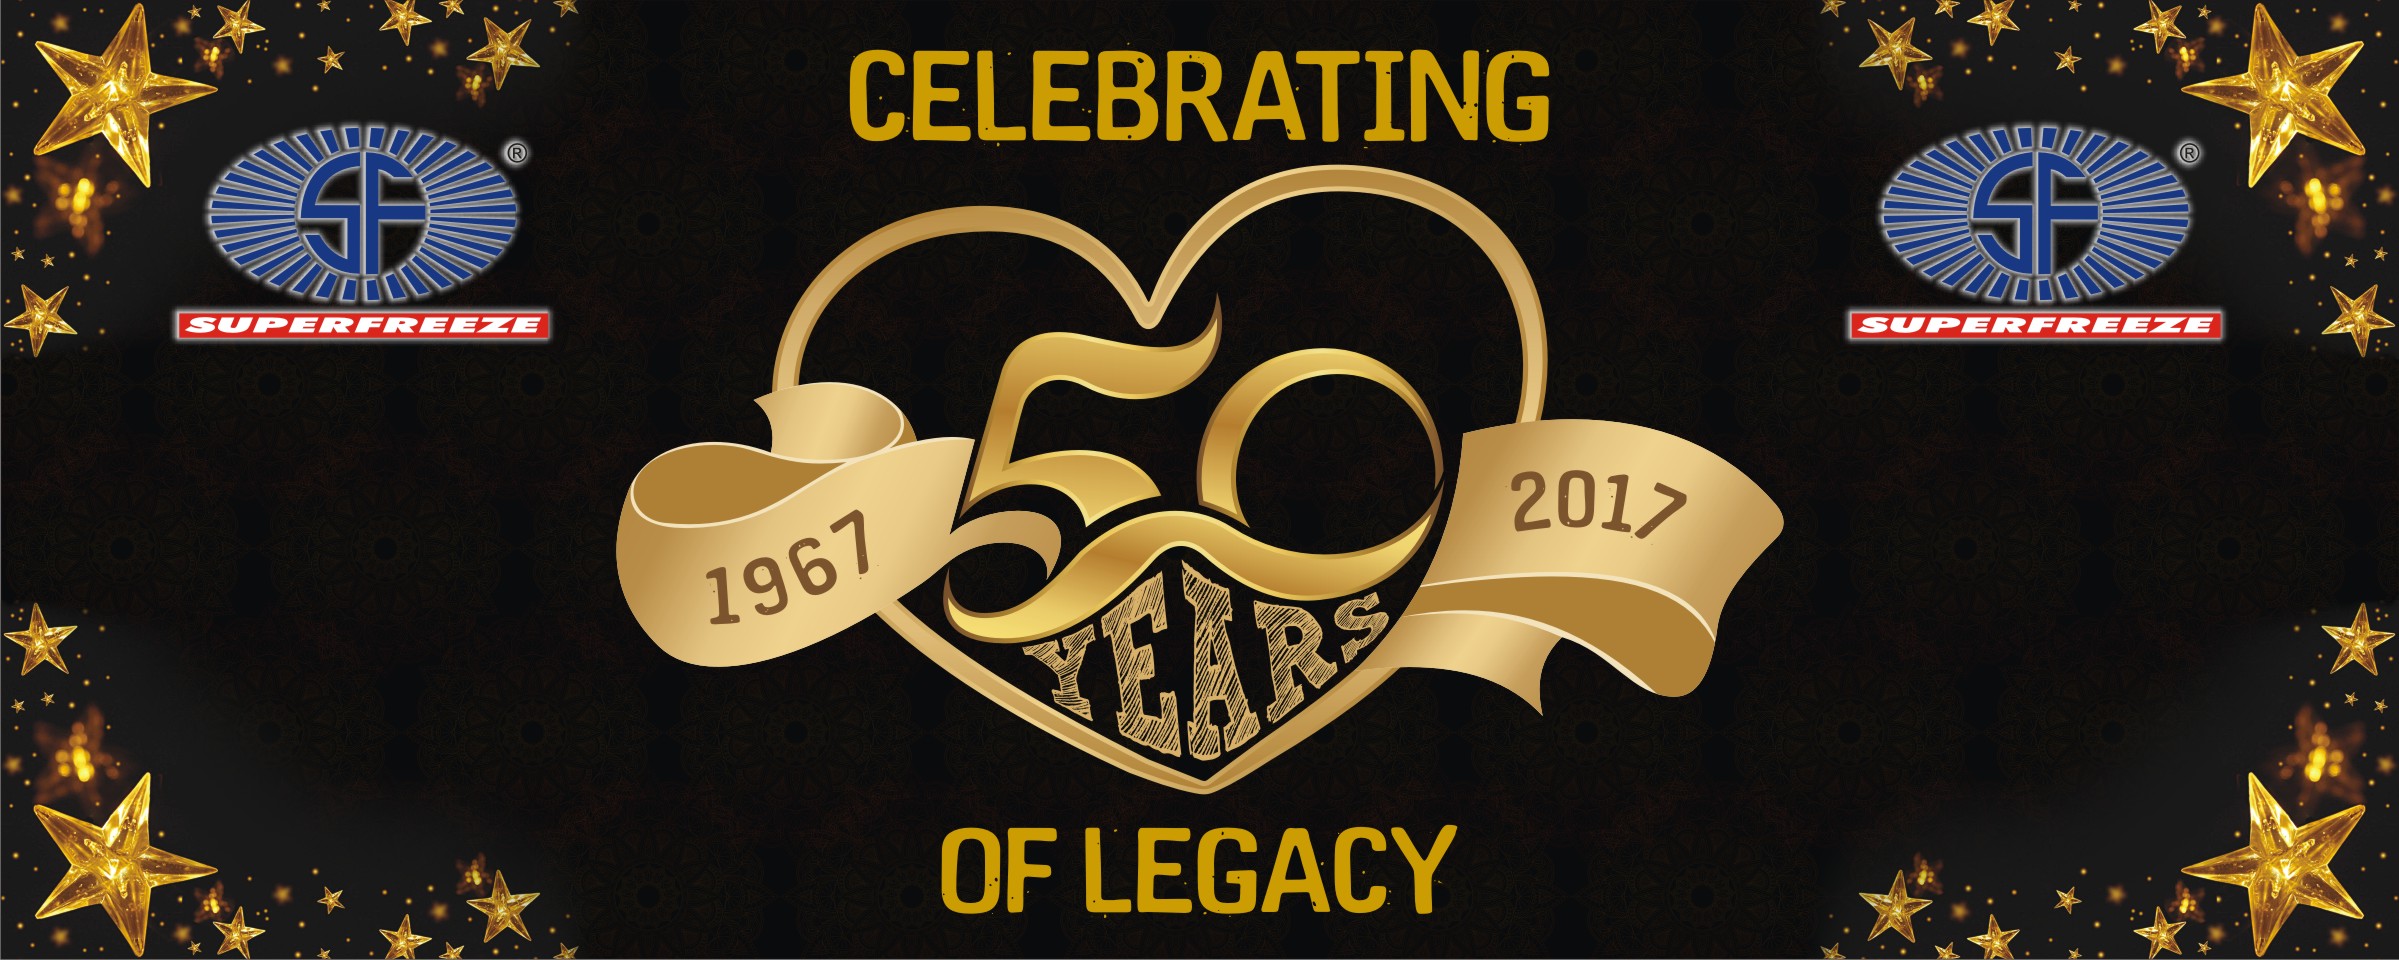 50 YEARS OF LEGACY  2018